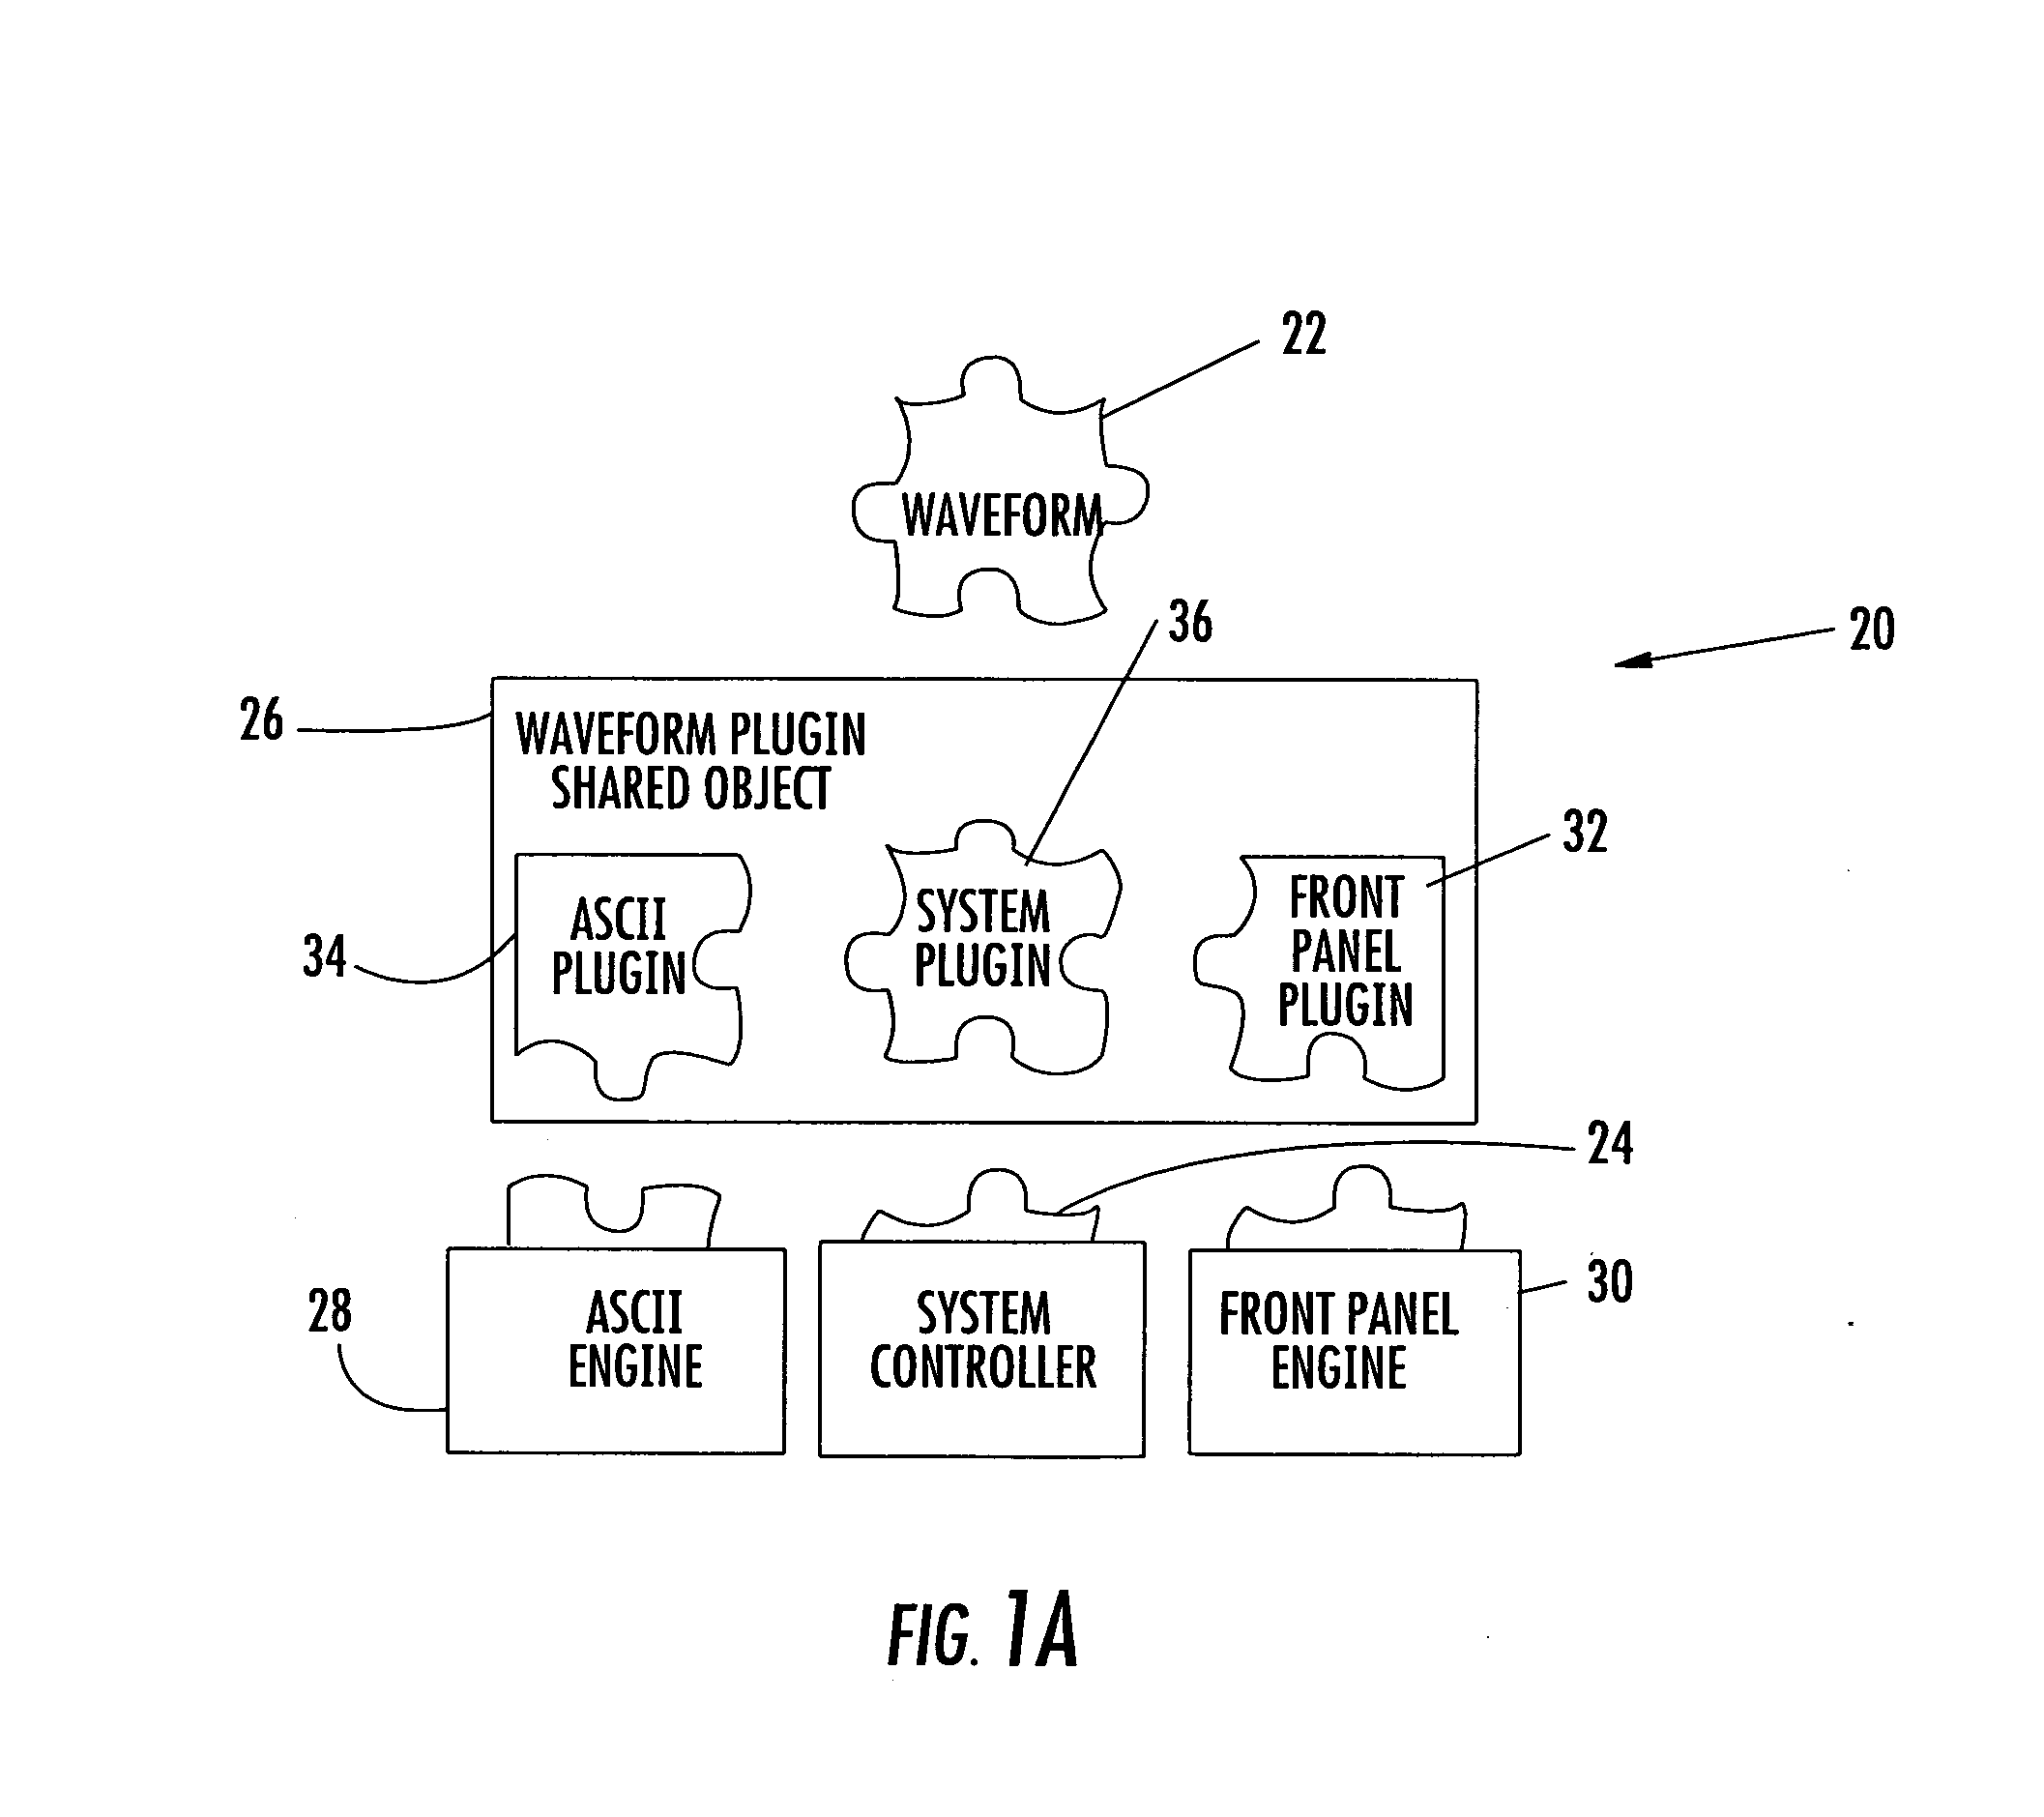 Extensible human machine interface (HMI) plugin architecture for radio software system and related method